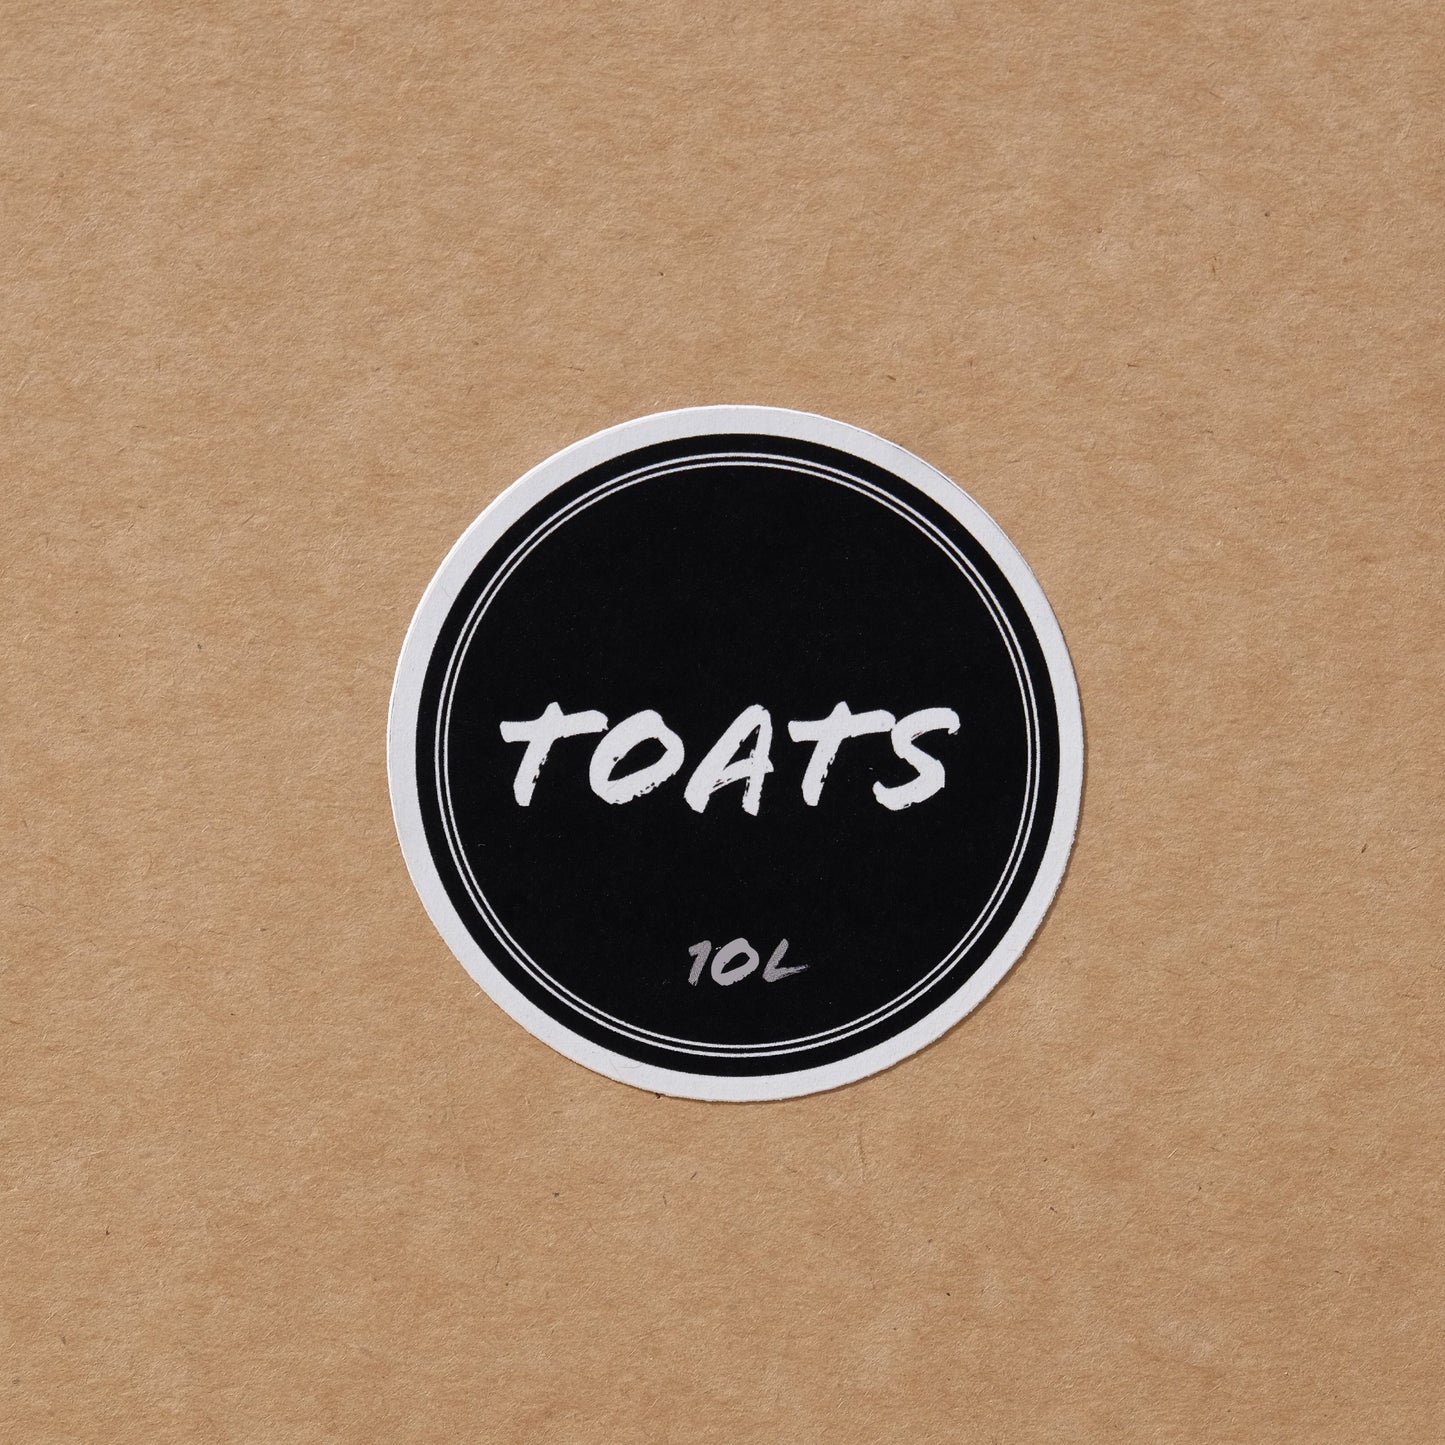 TOATS BASE 10L Bag-In-Box (with tap)